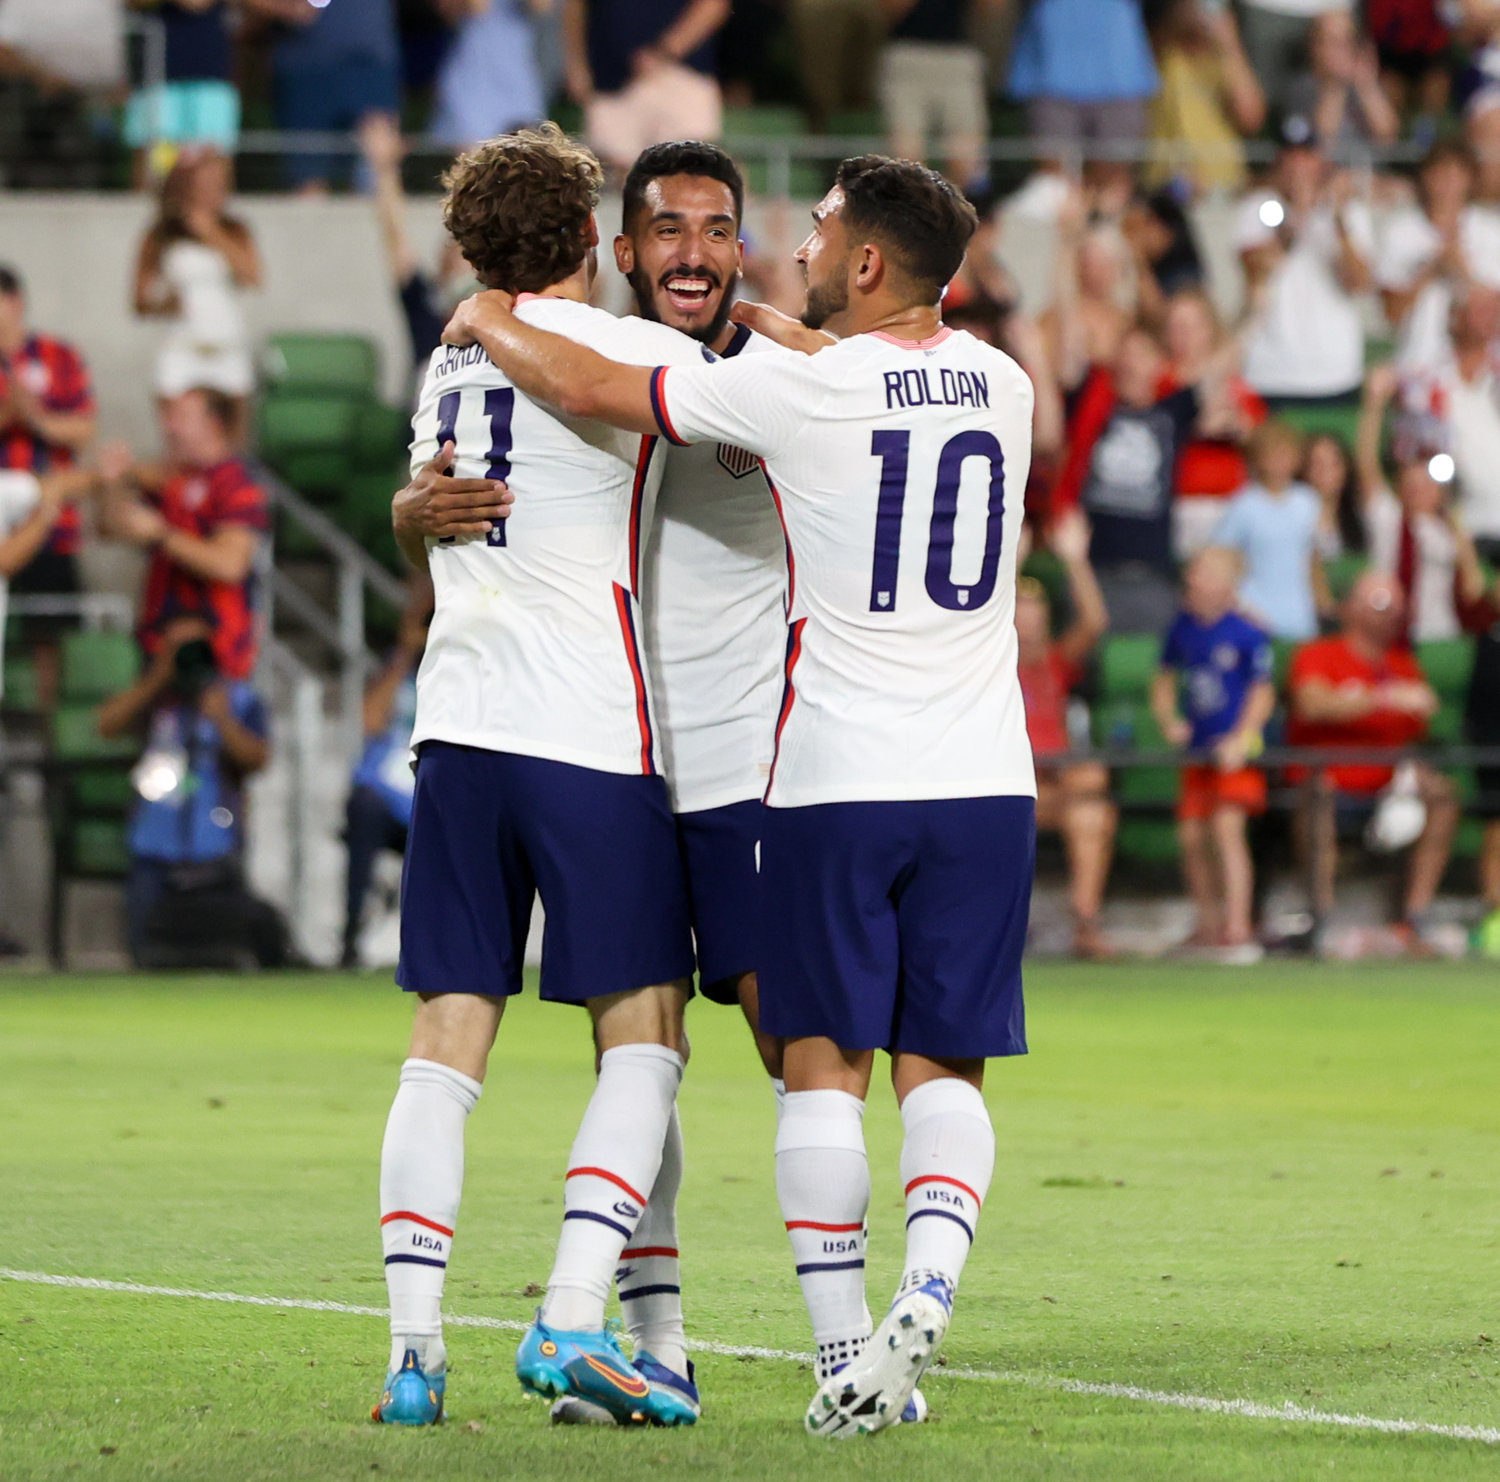 United States forward Brendan Aaronson (11) and forward Christian Pulisic (10) congratulate forward Jesus Ferriera  (center) after a goal during a Concacaf Nations League match on June 10, 2022 in Austin, Texas. Ferriera scored four of the USA’s five goals in the 5-0 win over Grenada.